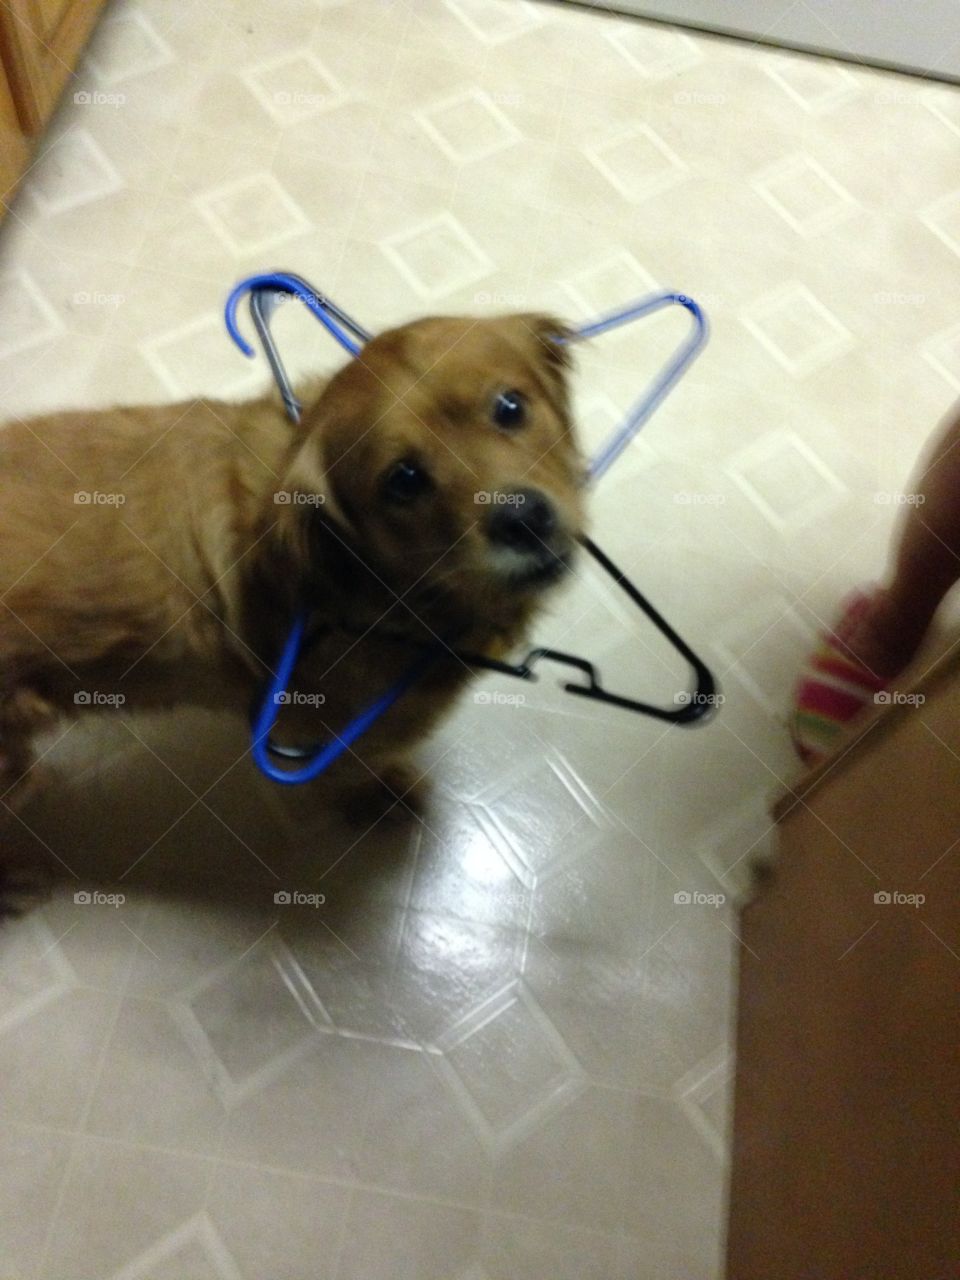 Dont even care I put hangers on his head HAHA